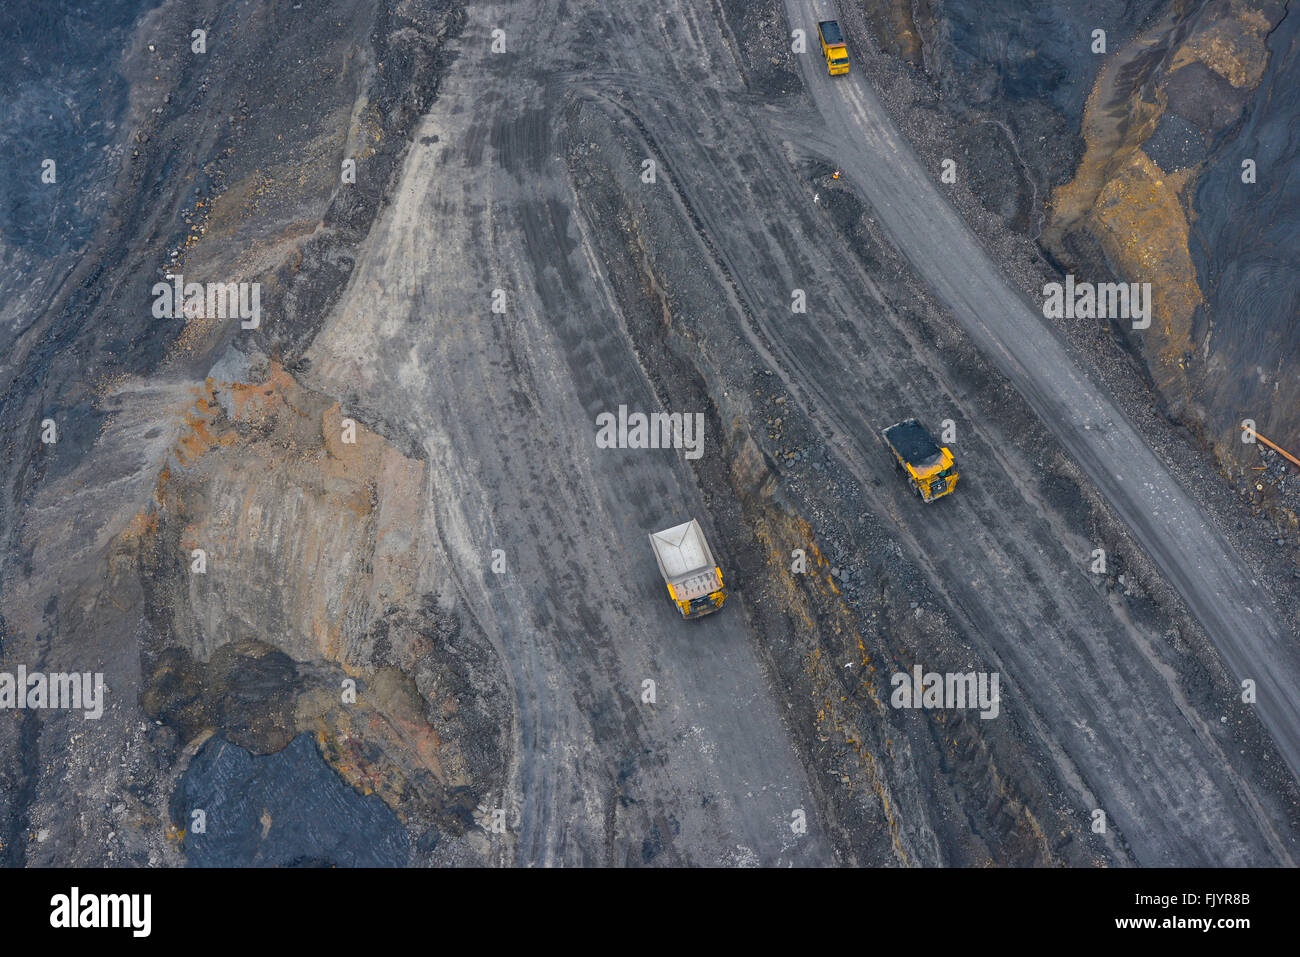 An aerial view of trucks in an opencast coal mine Stock Photo